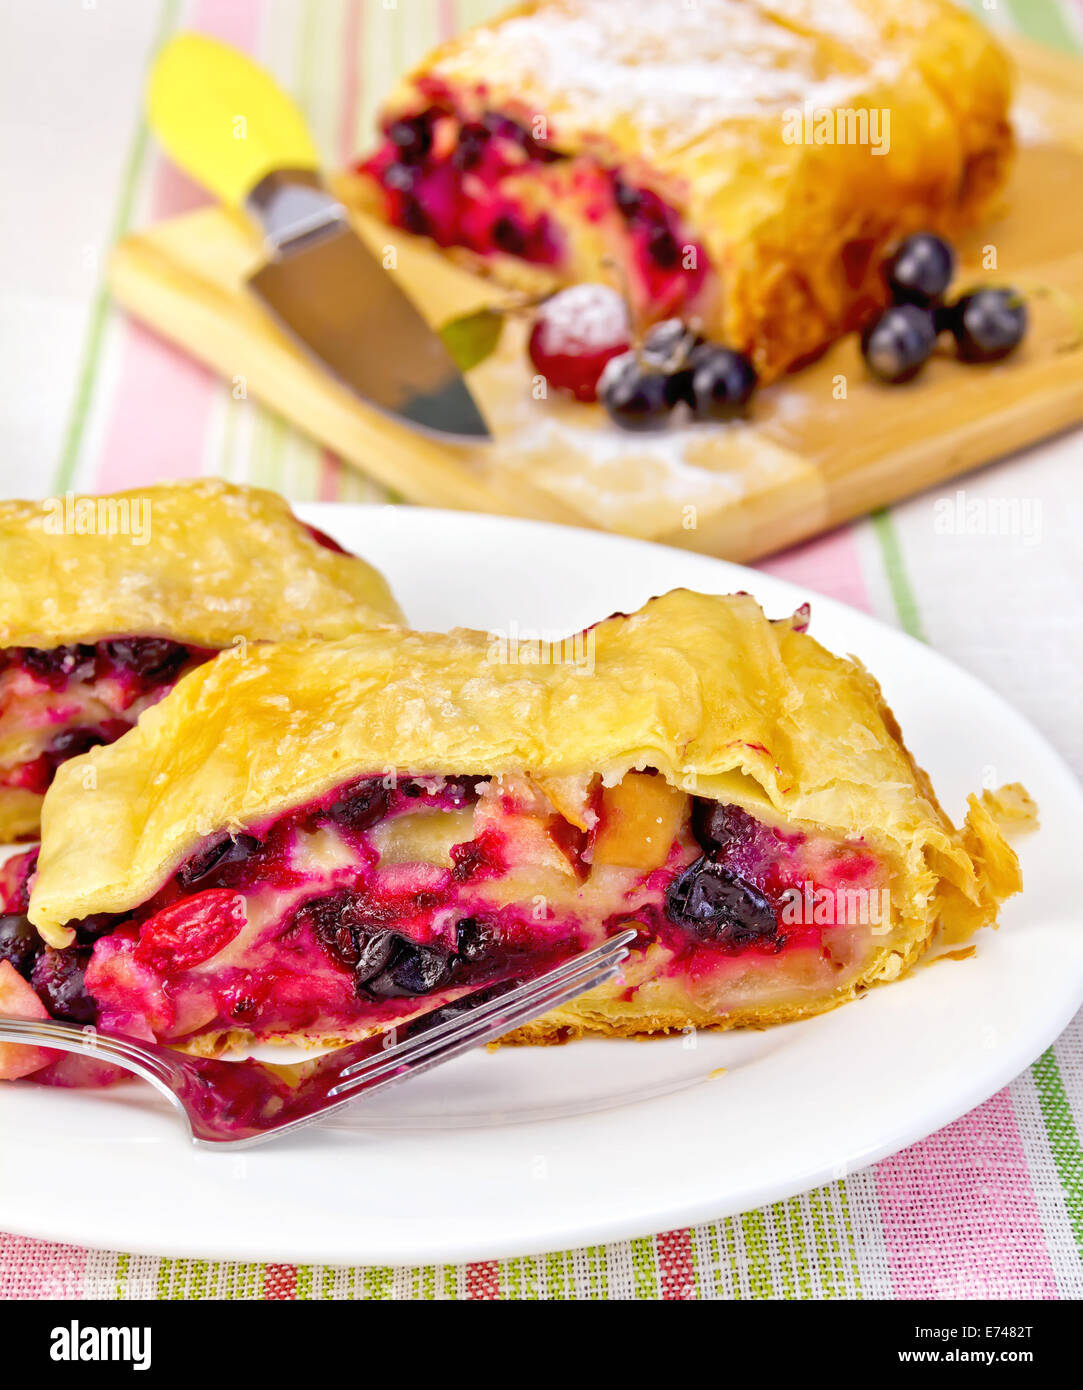 Strudel with black currant and cherry on a plate with fork, knife on background linen tablecloth Stock Photo